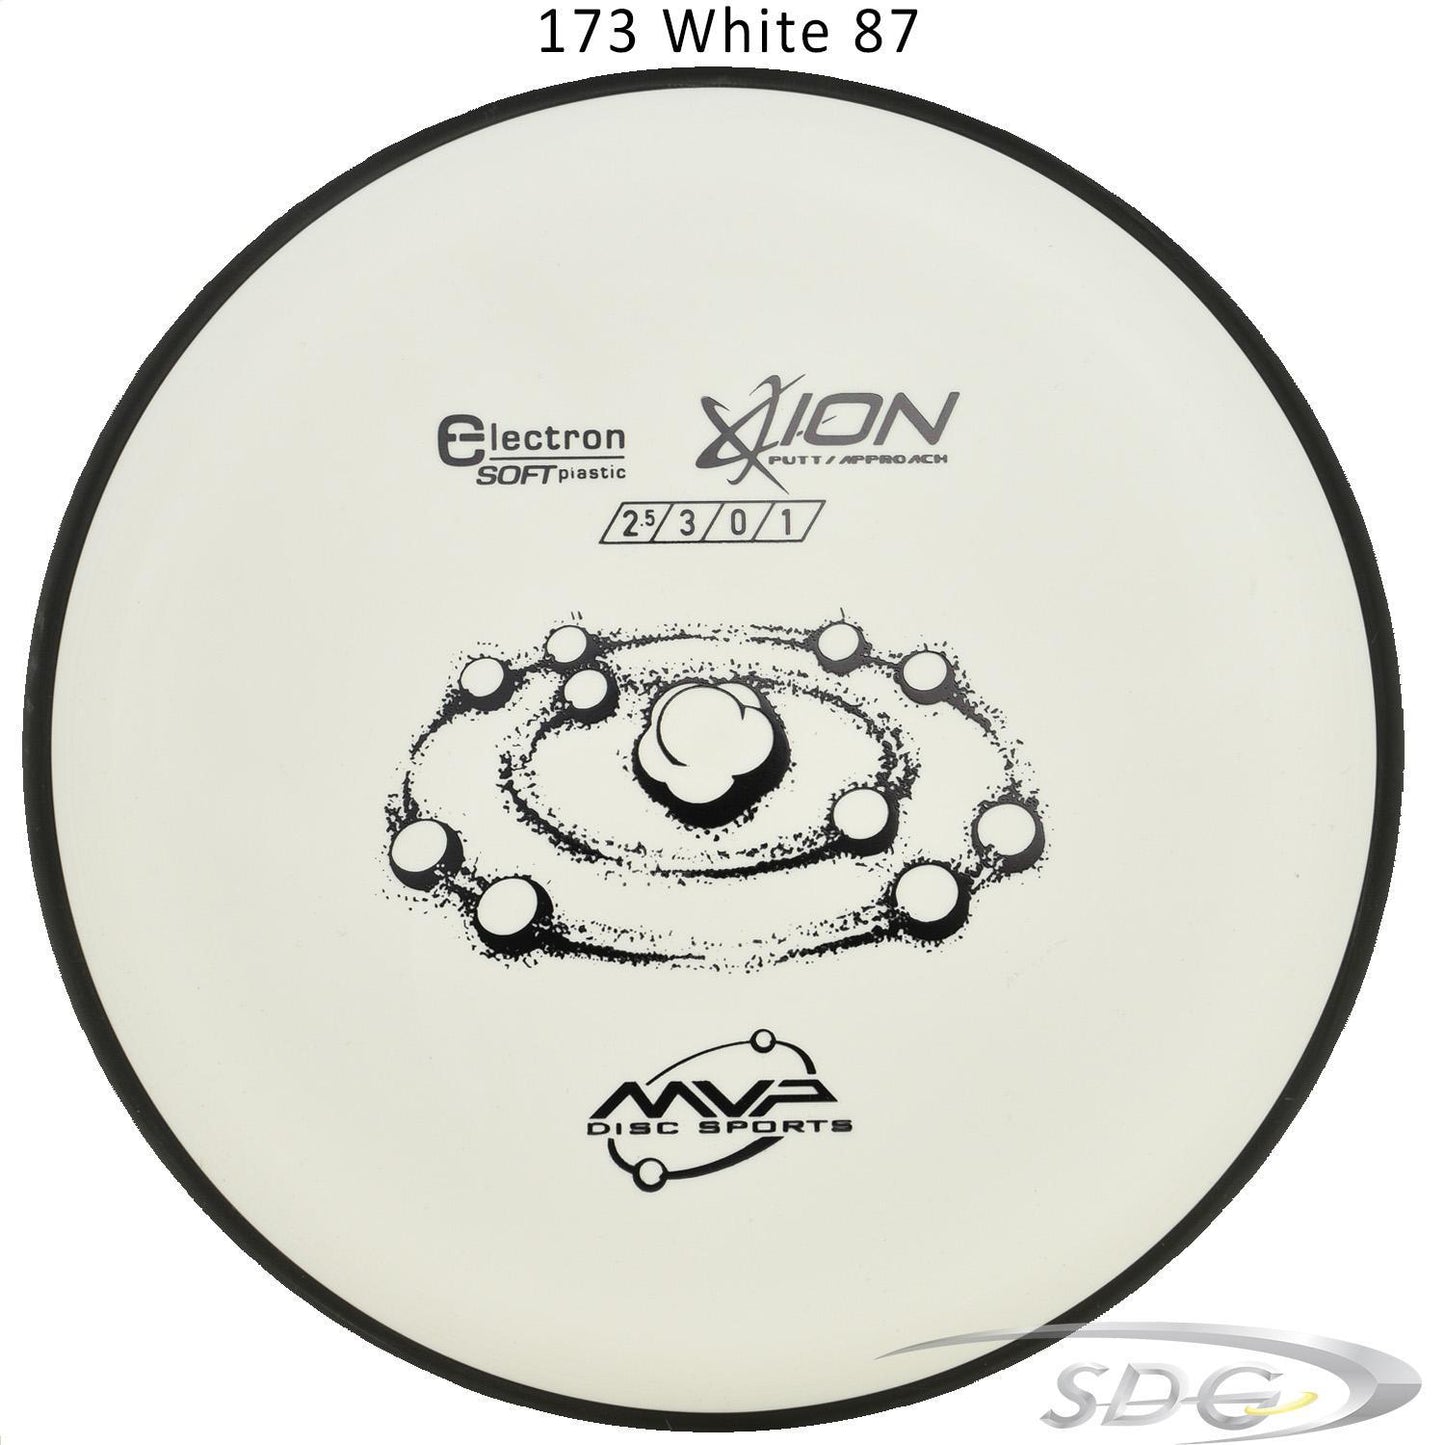 mvp-electron-ion-soft-disc-golf-putt-approach 173 White 87 